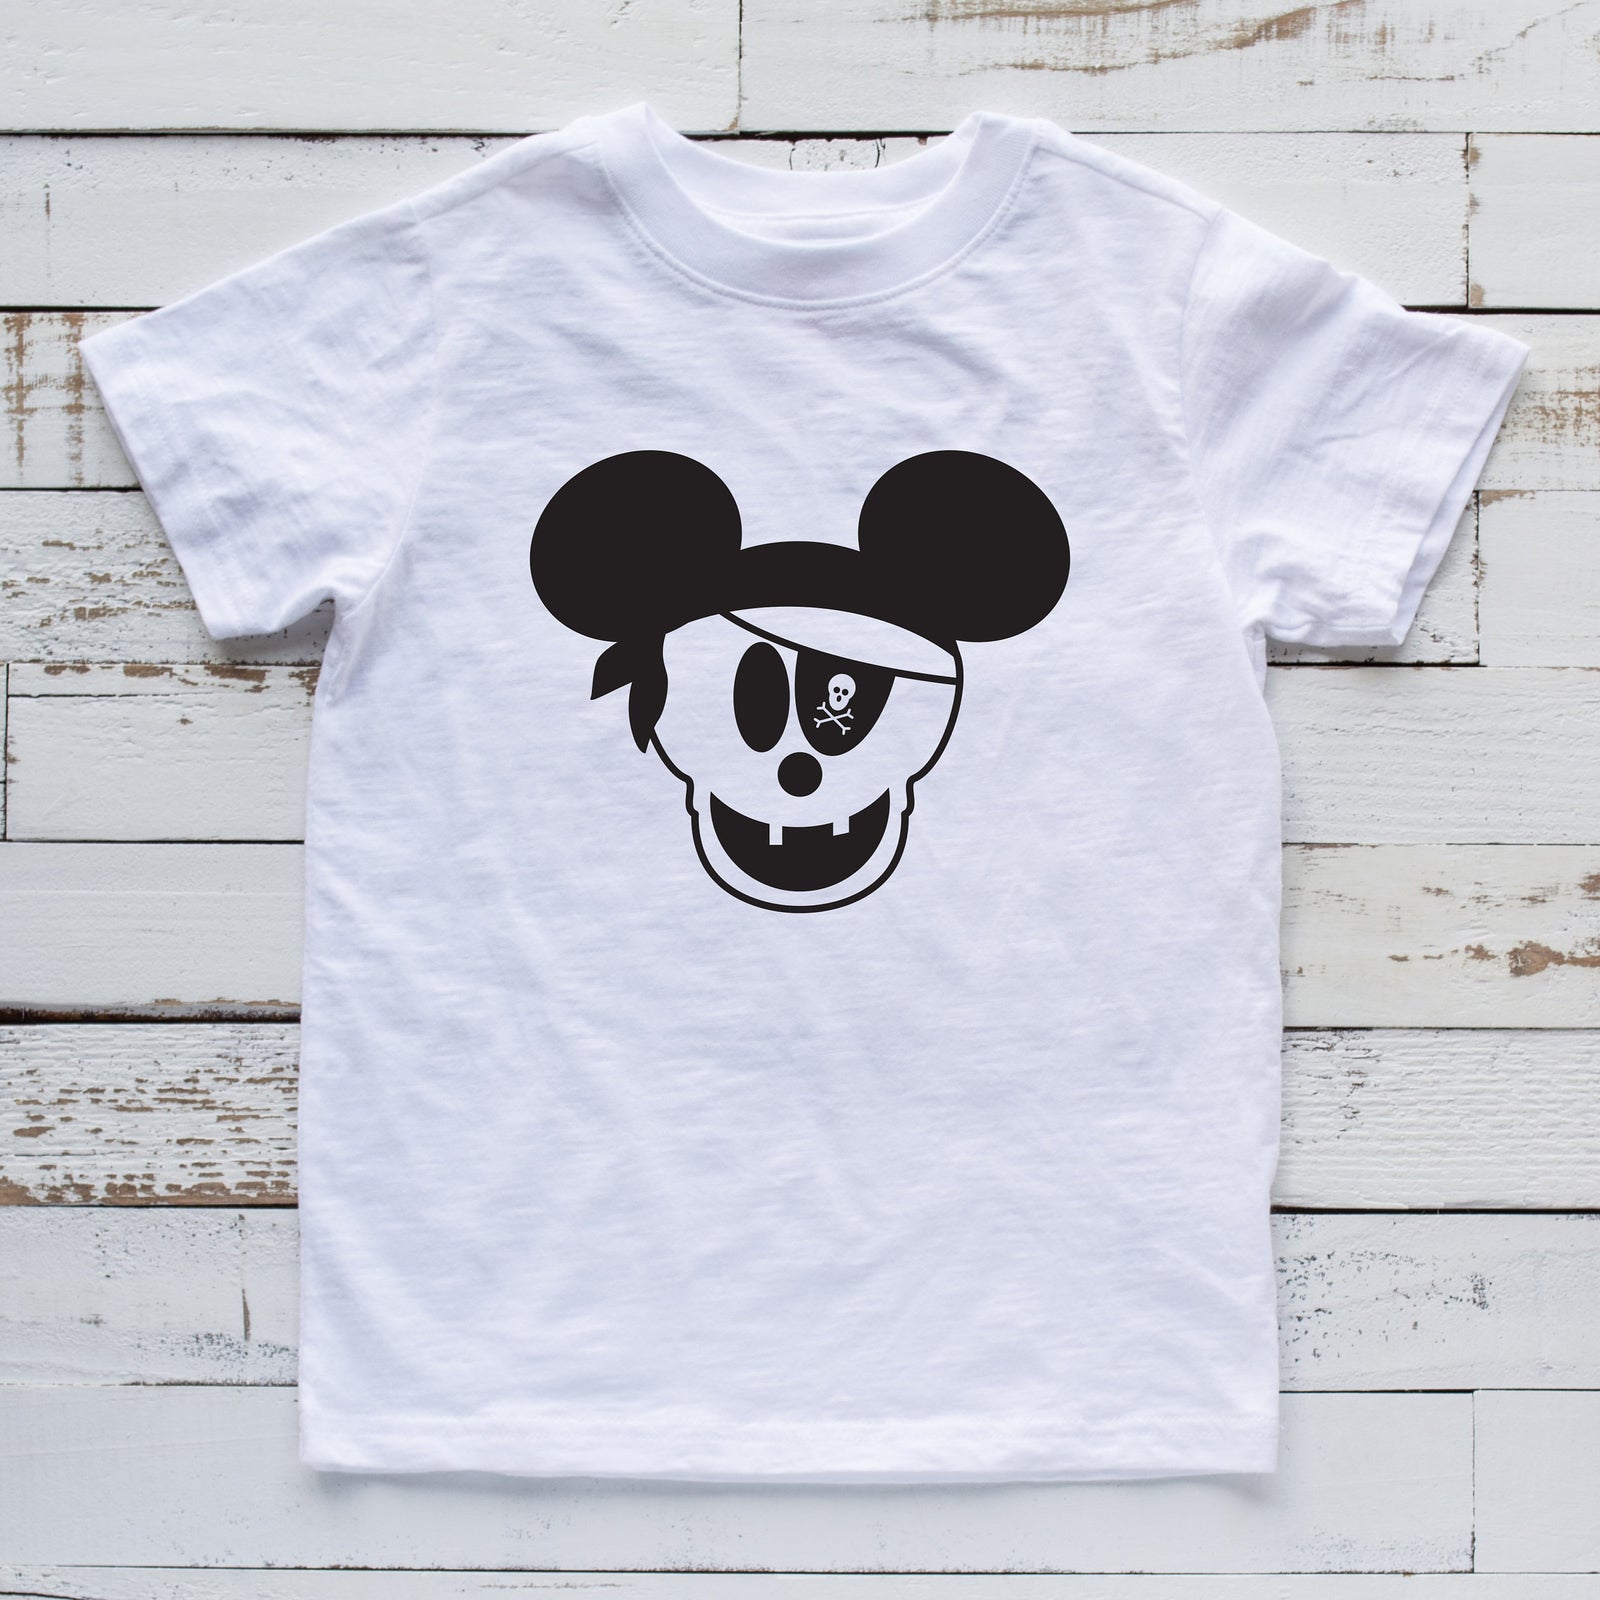 Custom Pirate Mickey Mouse Disney T shirt - Personalized Disney Matching Family Shirts - Ahoy - Pirate's Life Skull